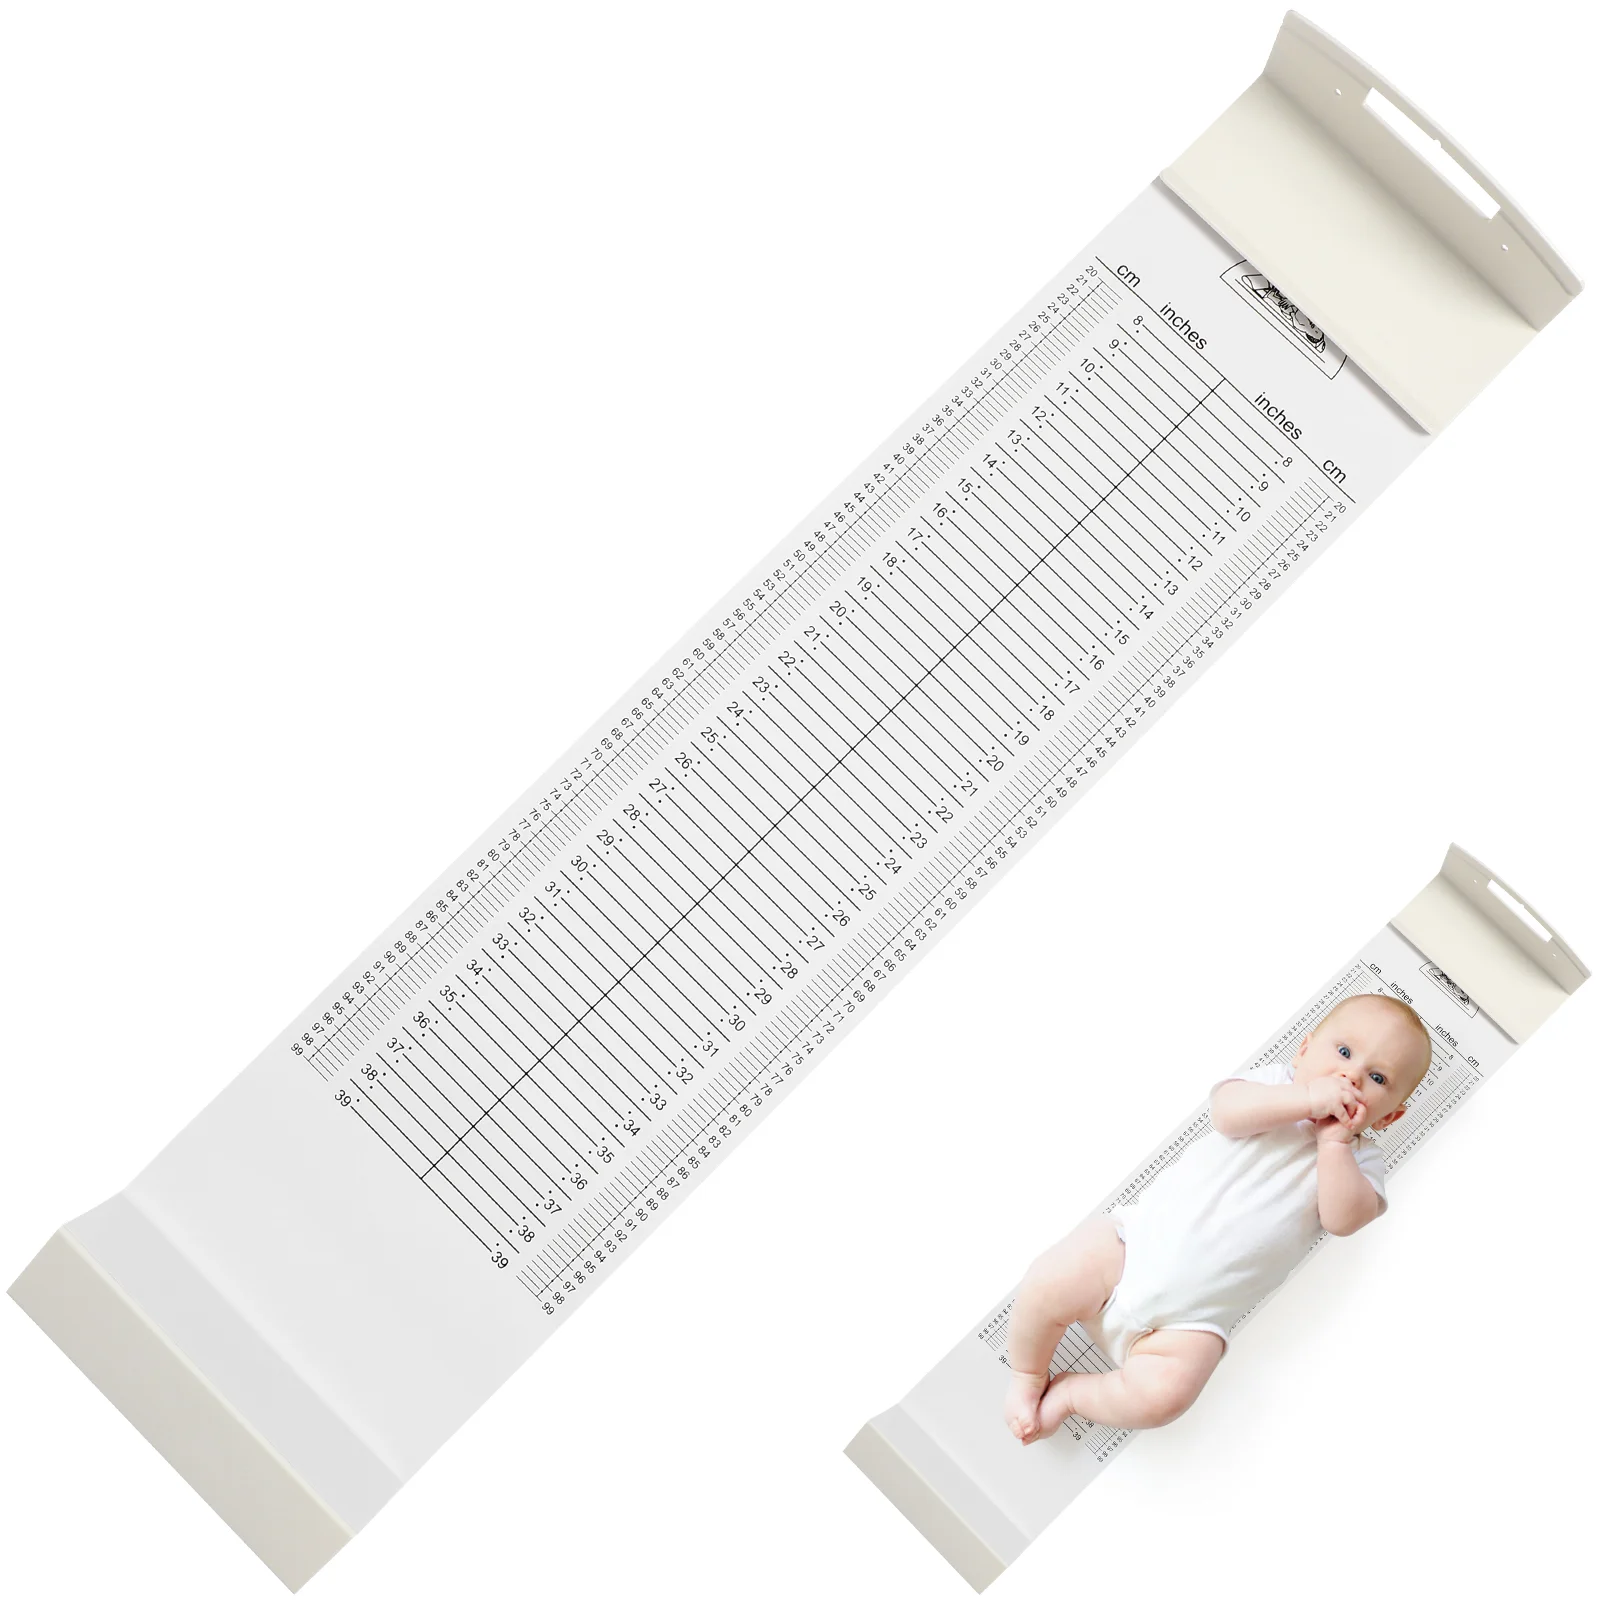 

Height Measuring Mat Kids Baby Decor Chart Ruler Growth Measure Newborn Room Nursery Wall Infant Measurement Toddler Rulers Tape